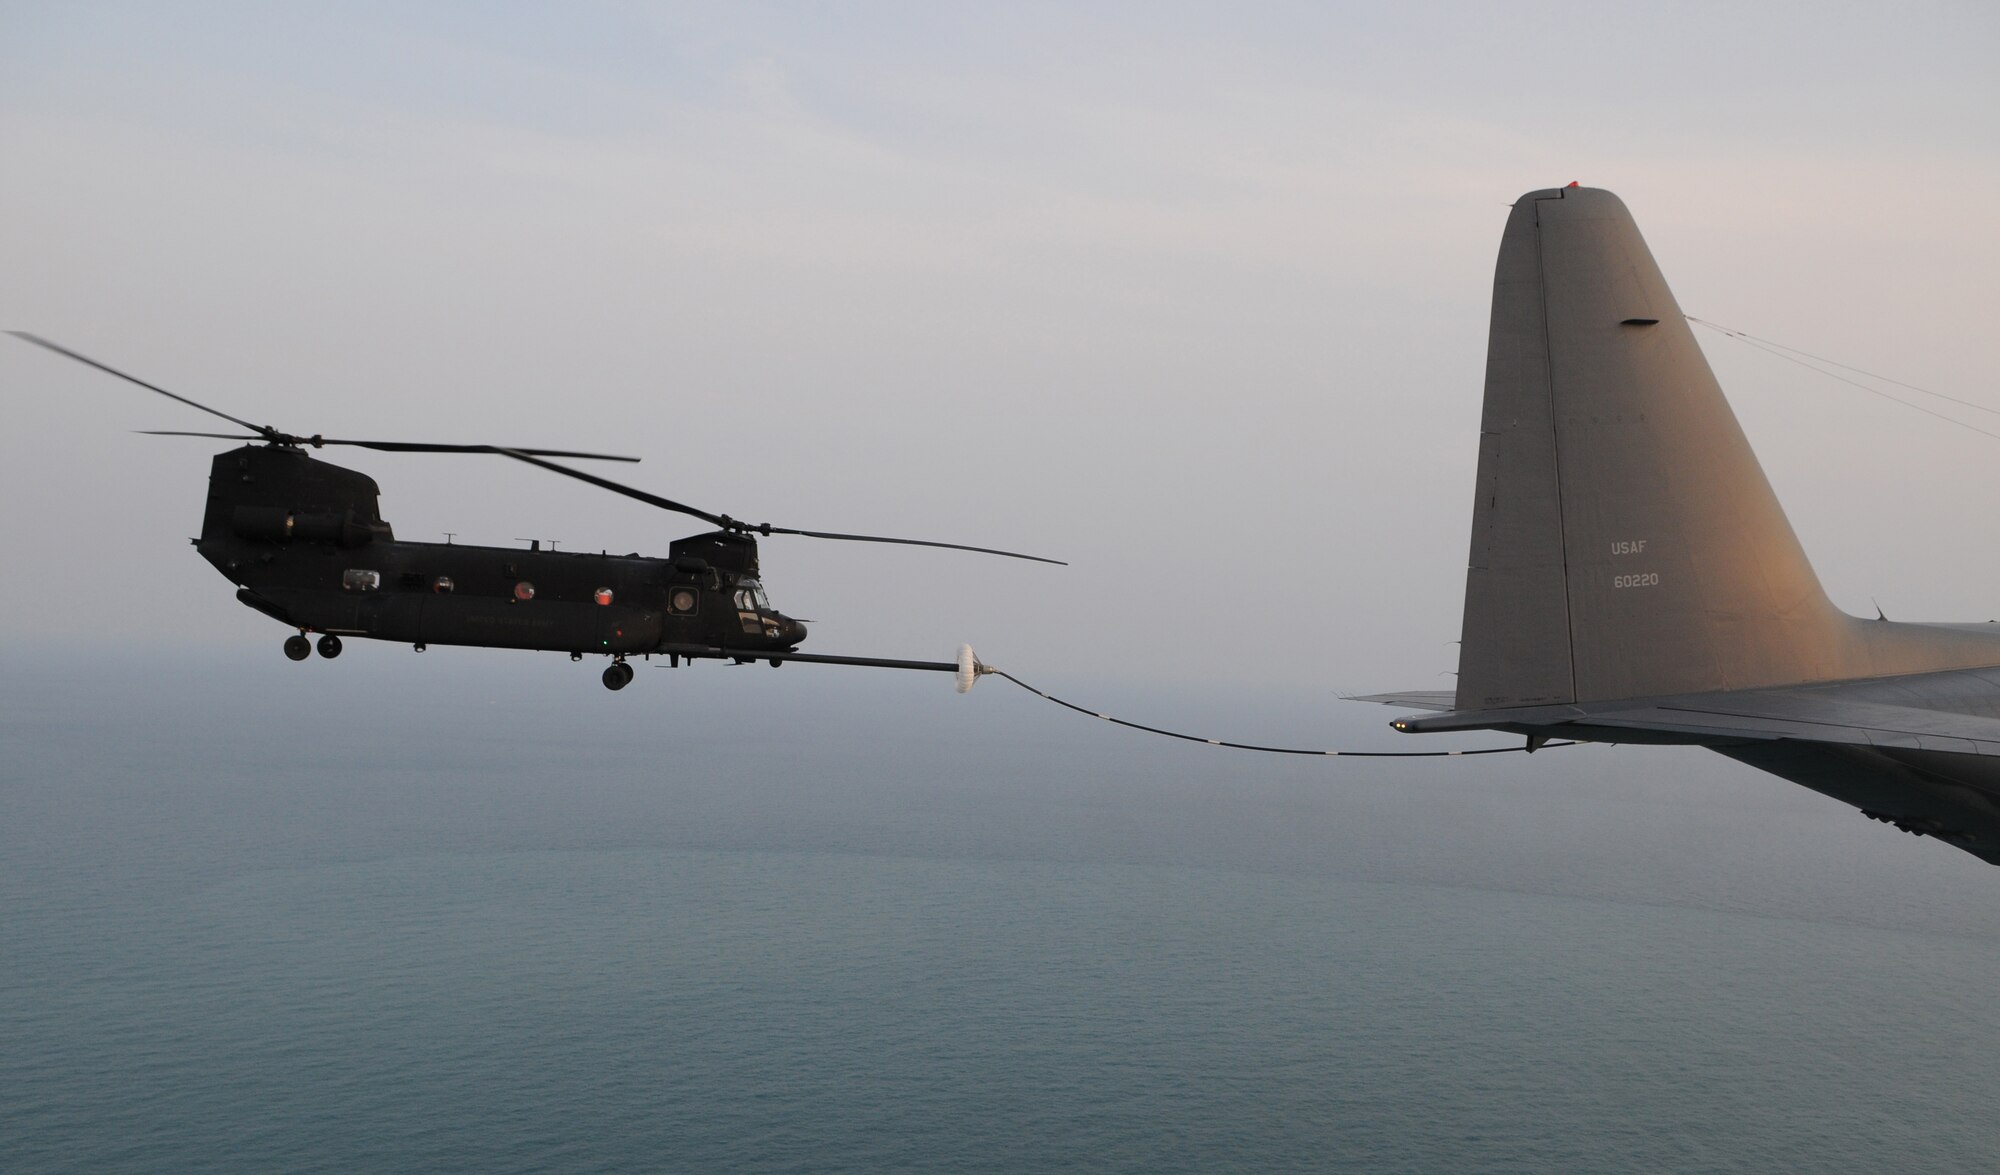 OVER THE REPUBLIC OF KOREA -- A U.S. Army MH-47 helicopter from the 160th Special Operations Aviation Regiment (Airborne) connects to a drogue refueling pod from a 17th Special Operations Squadron MC-130P Combat Shadow during a refueling training mission here March 30 during Foal Eagle 2009.  Foal Eagle is an annual combined training exercise for U.S. and Republic of Korea forces to evaluate and improve their ability to coordinate procedures, plans and systems necessary to defend the ROK. The 17th SOS is deployed from Kadena Air Base, Japan, and the 160th SOAR is deployed from Fort Lewis, Wash. (U.S. Air Force photo by Tech. Sgt. Aaron Cram)